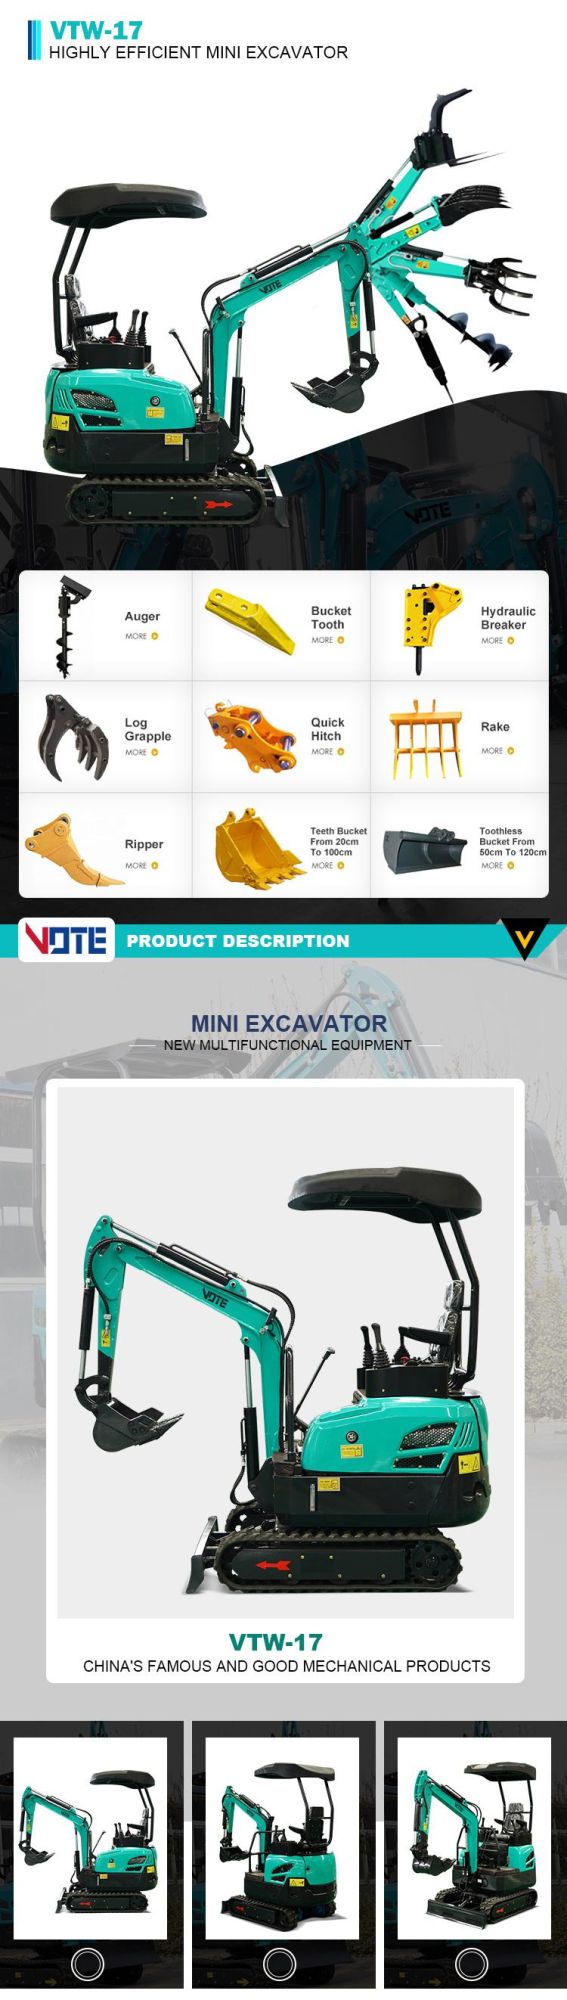 CE Approved Production China Mini Excavator Excavator 1/2/2.5/3 Ton Mini Excavator with Euro V Emission Engine